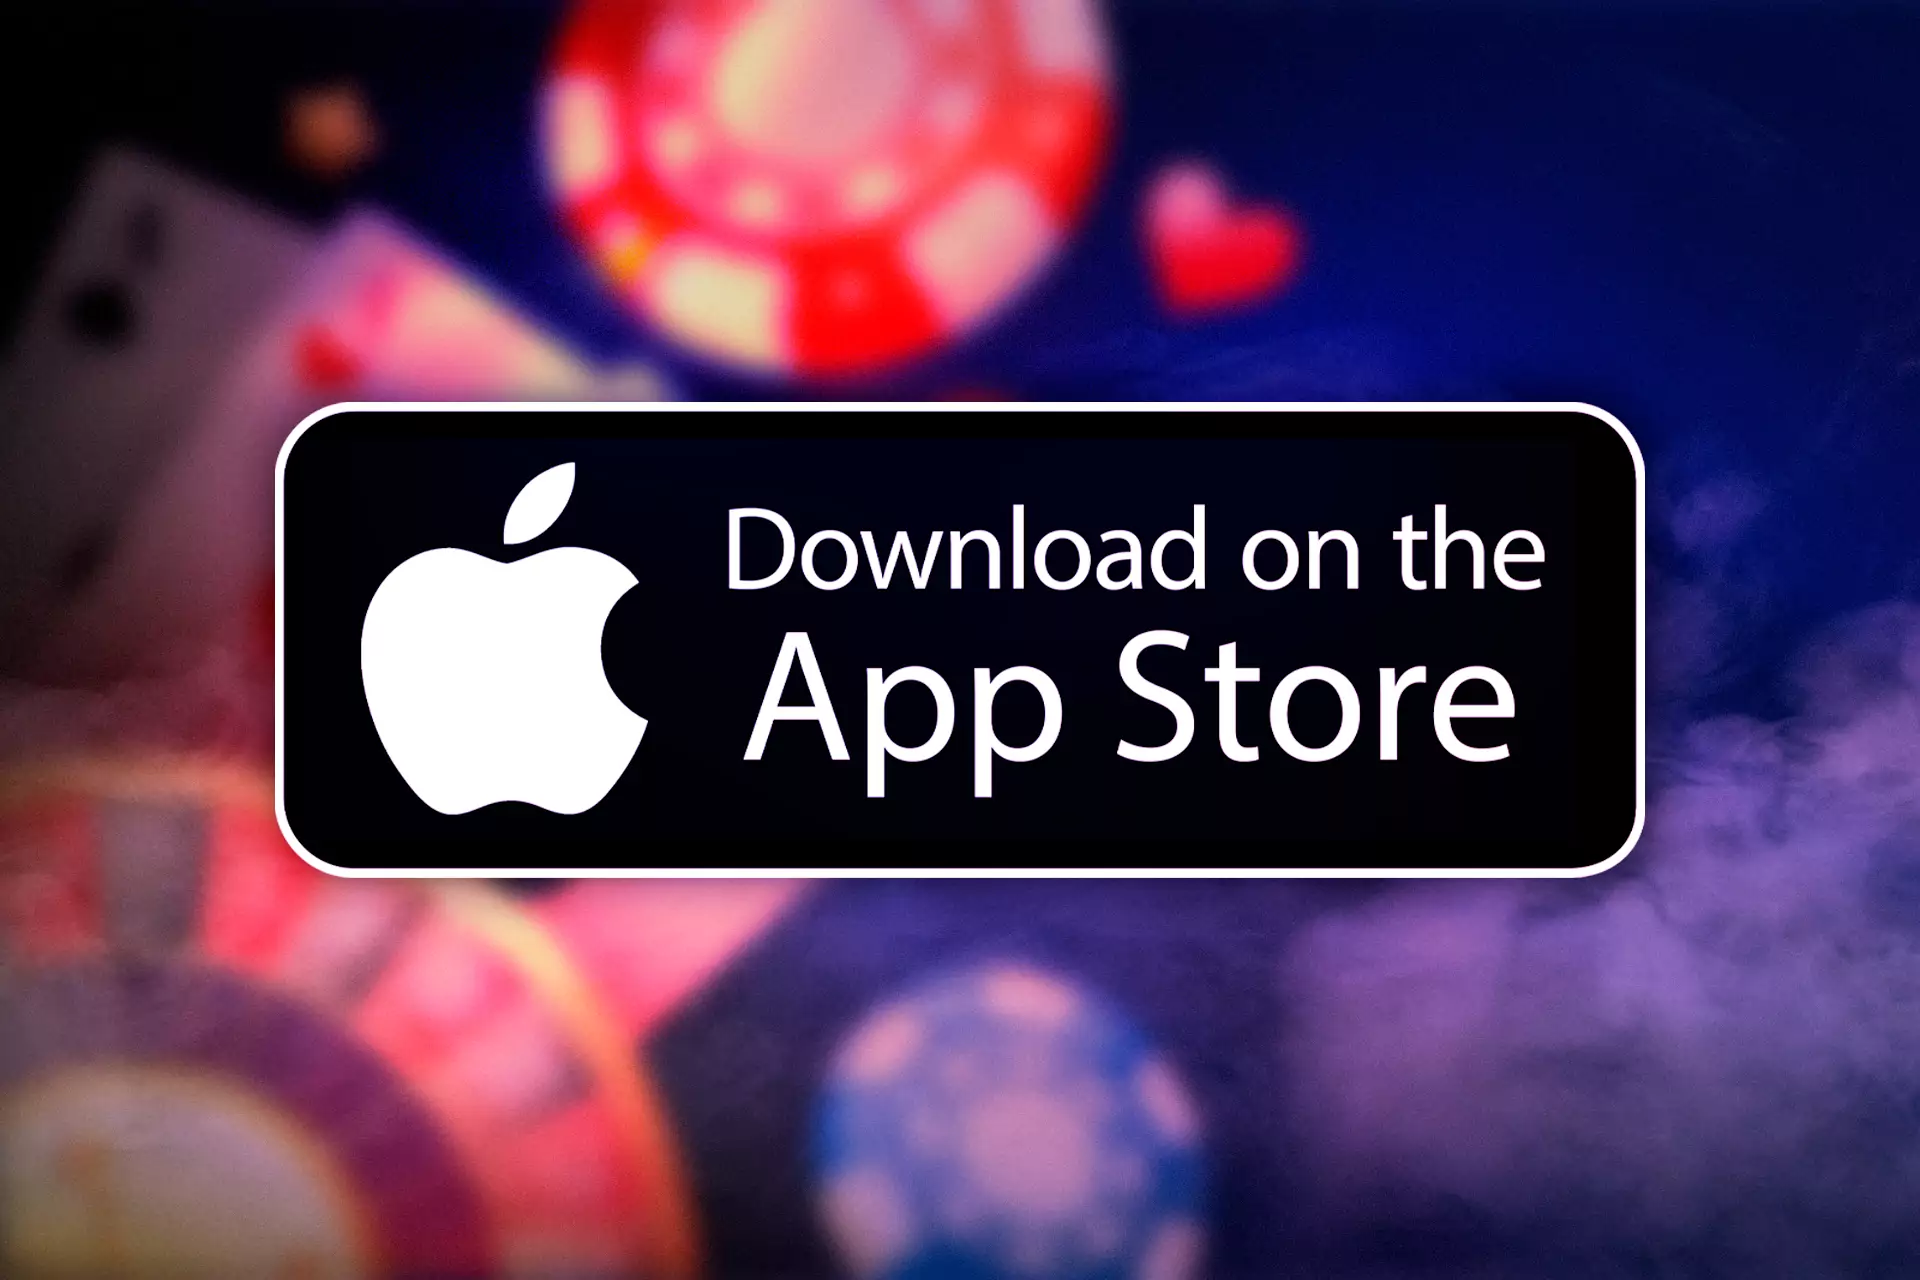 Go to the App Store and look for the casino app you want to install.